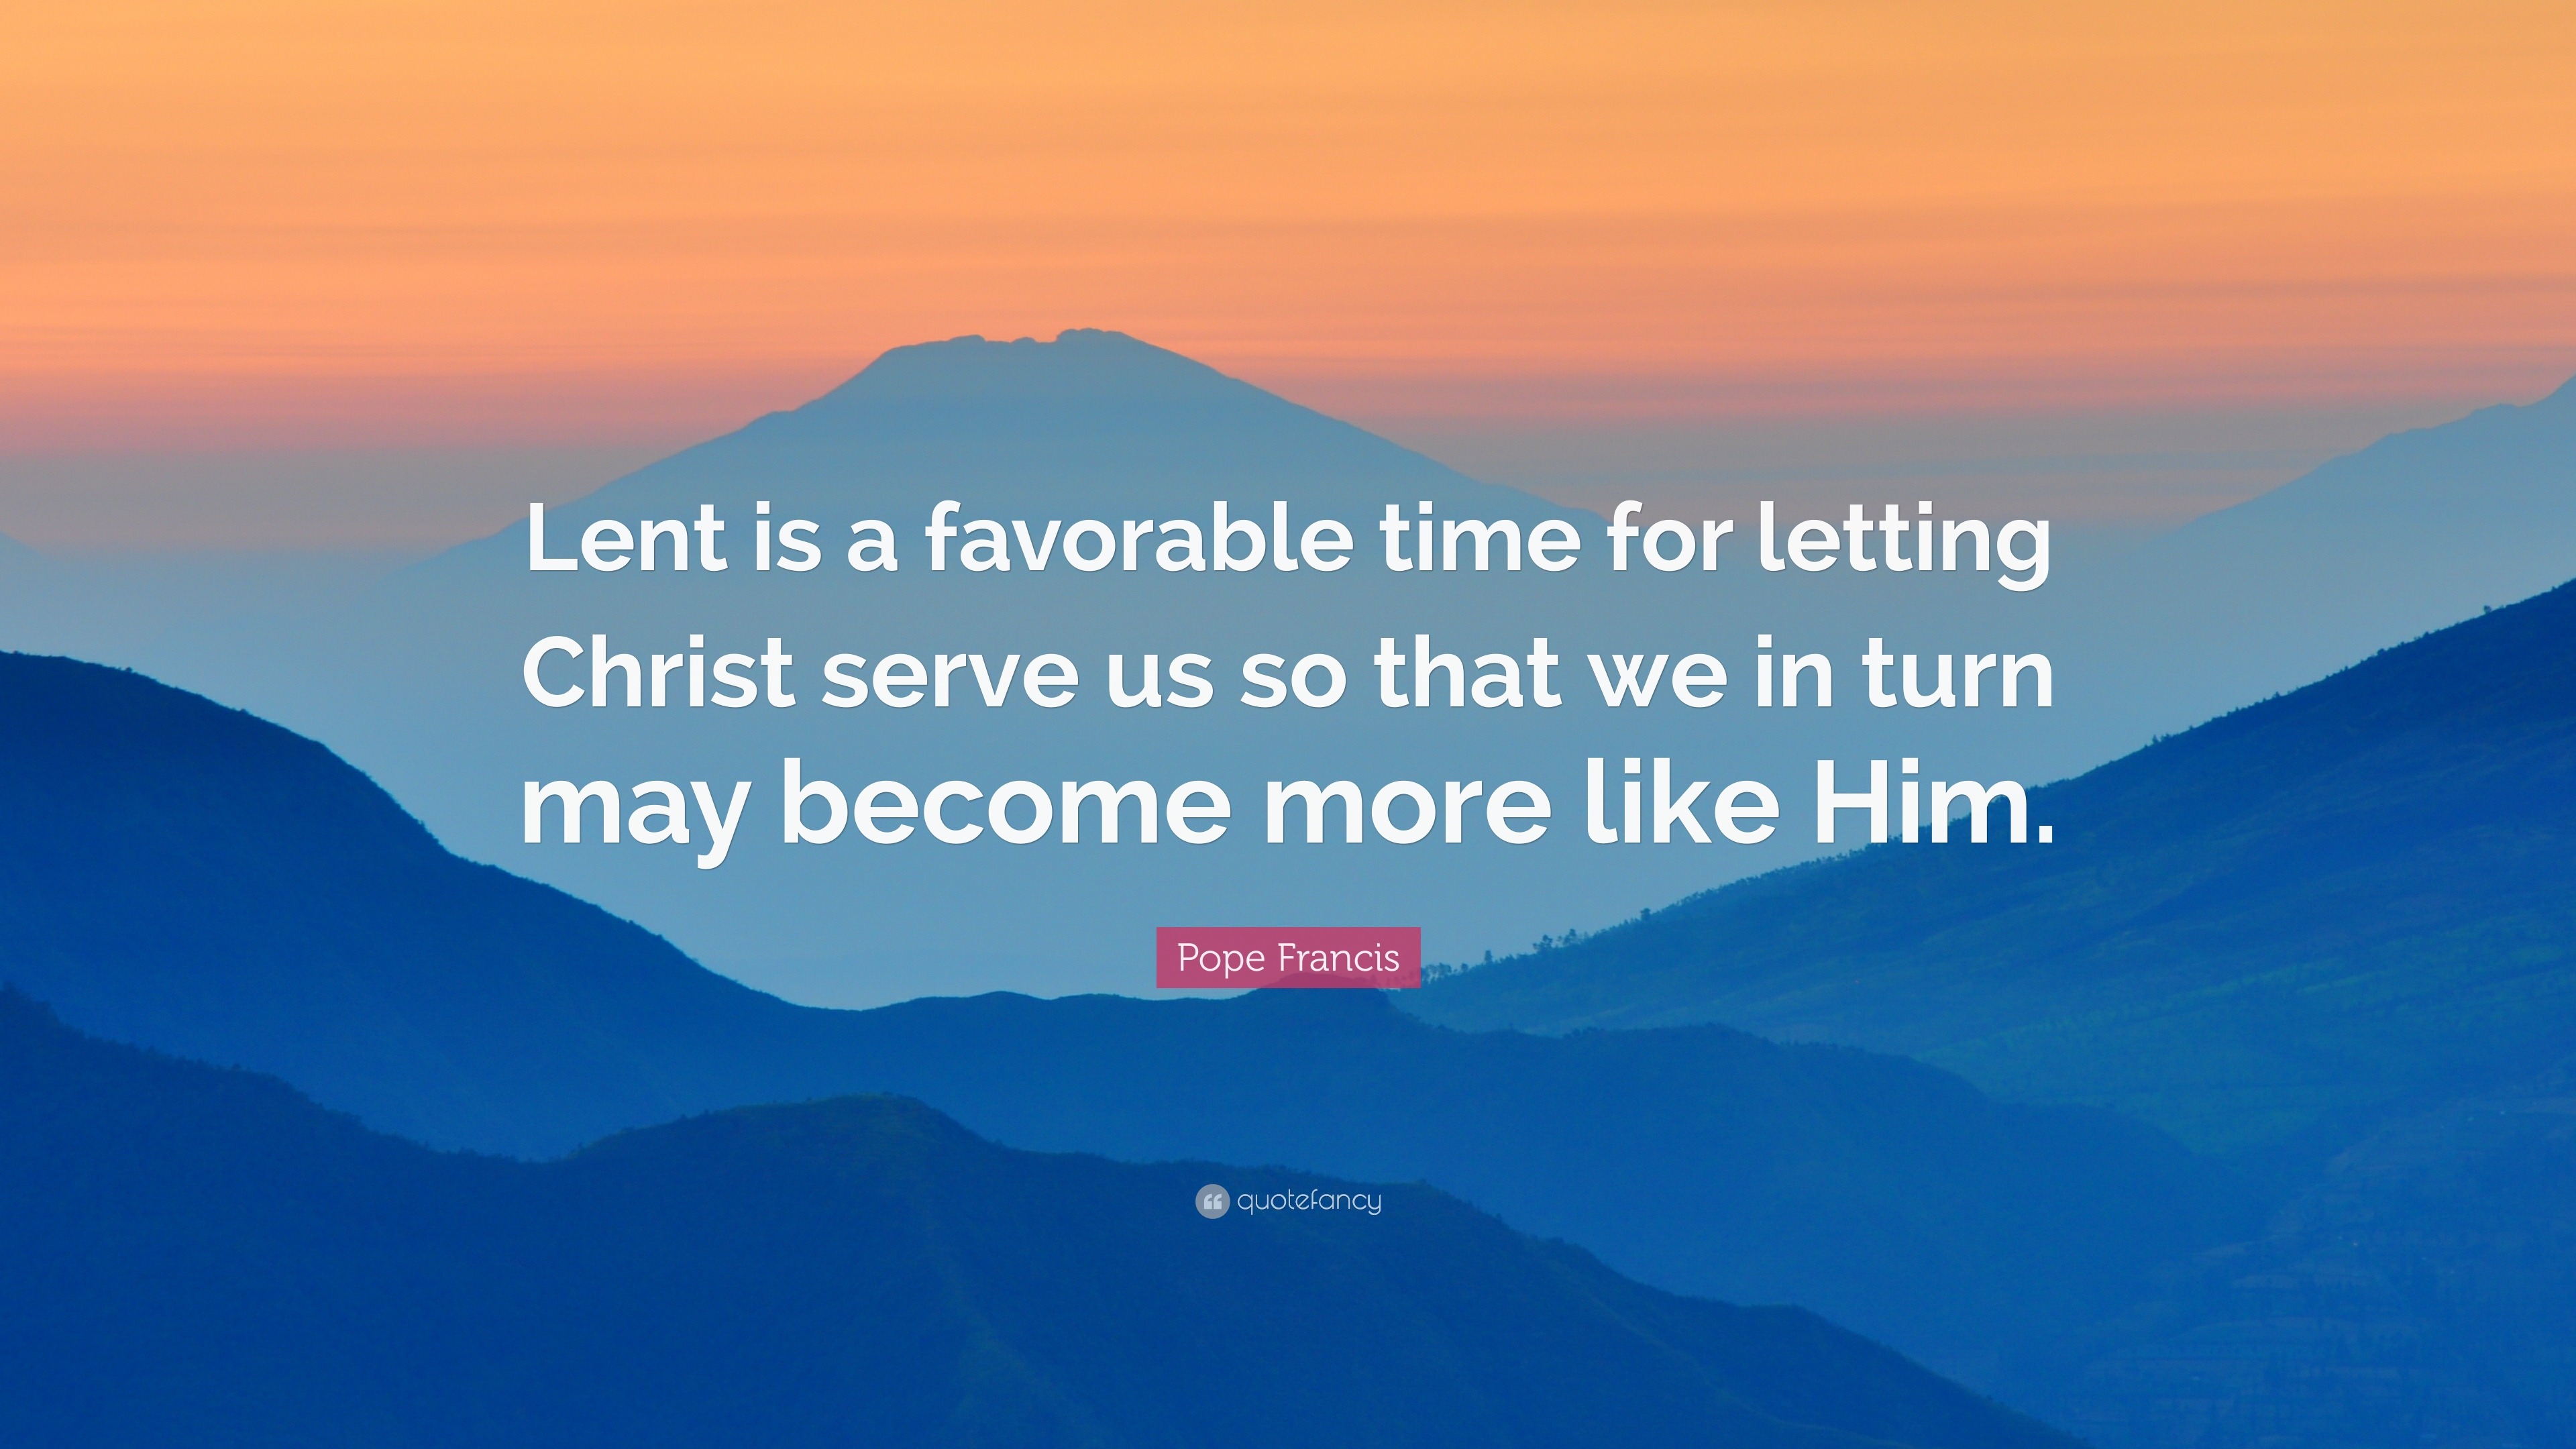 Pope Francis Quote: “Lent is a favorable time for letting Christ serve us  so that we